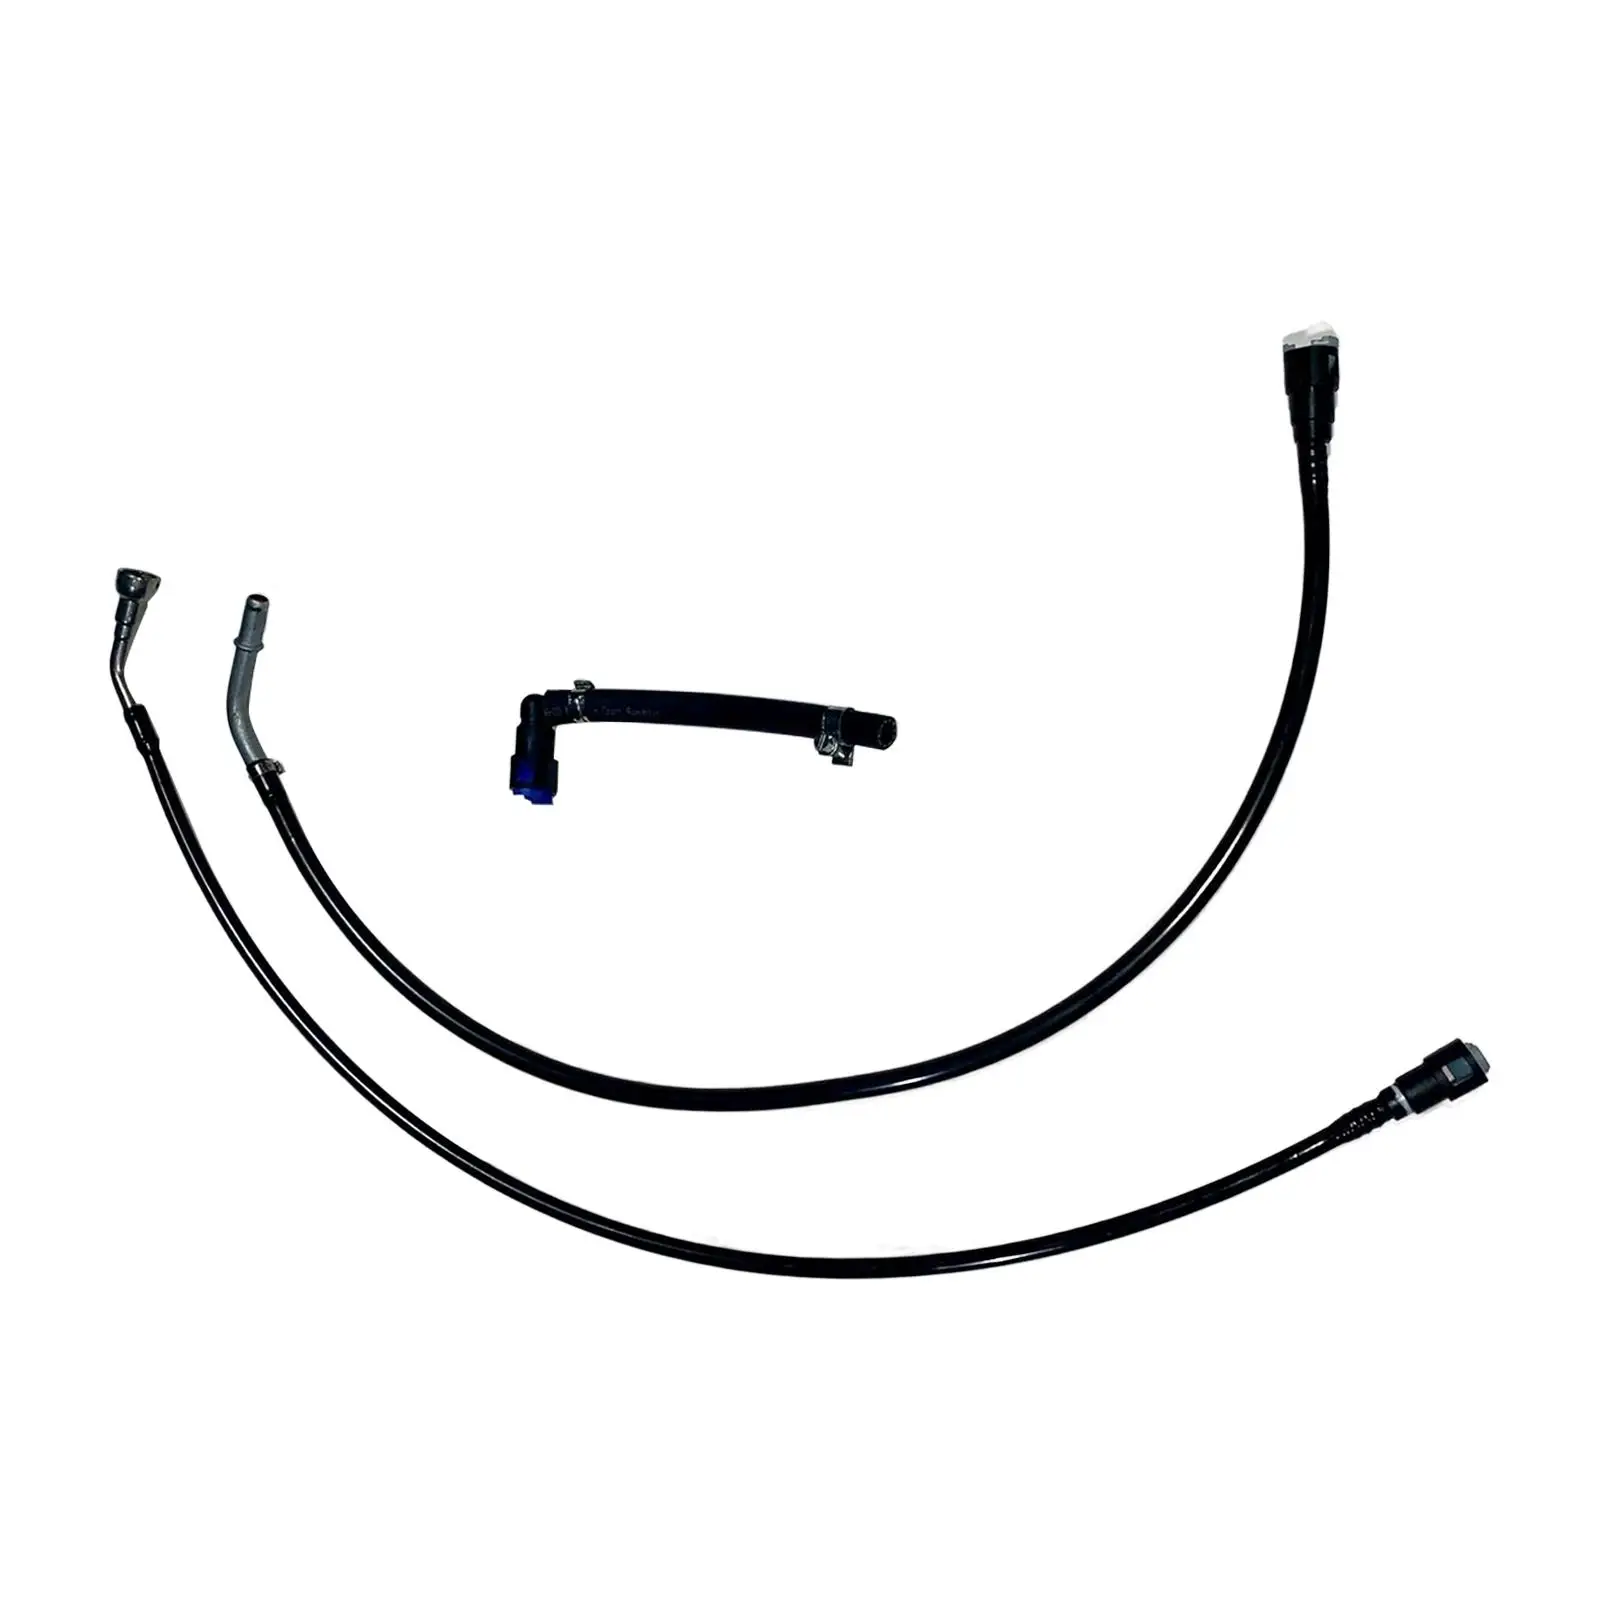 Fuel Line Set Durable Long Service Life High Performance Car Accessories Replacement Part for Jeep Grand Cherokee 1999-2004